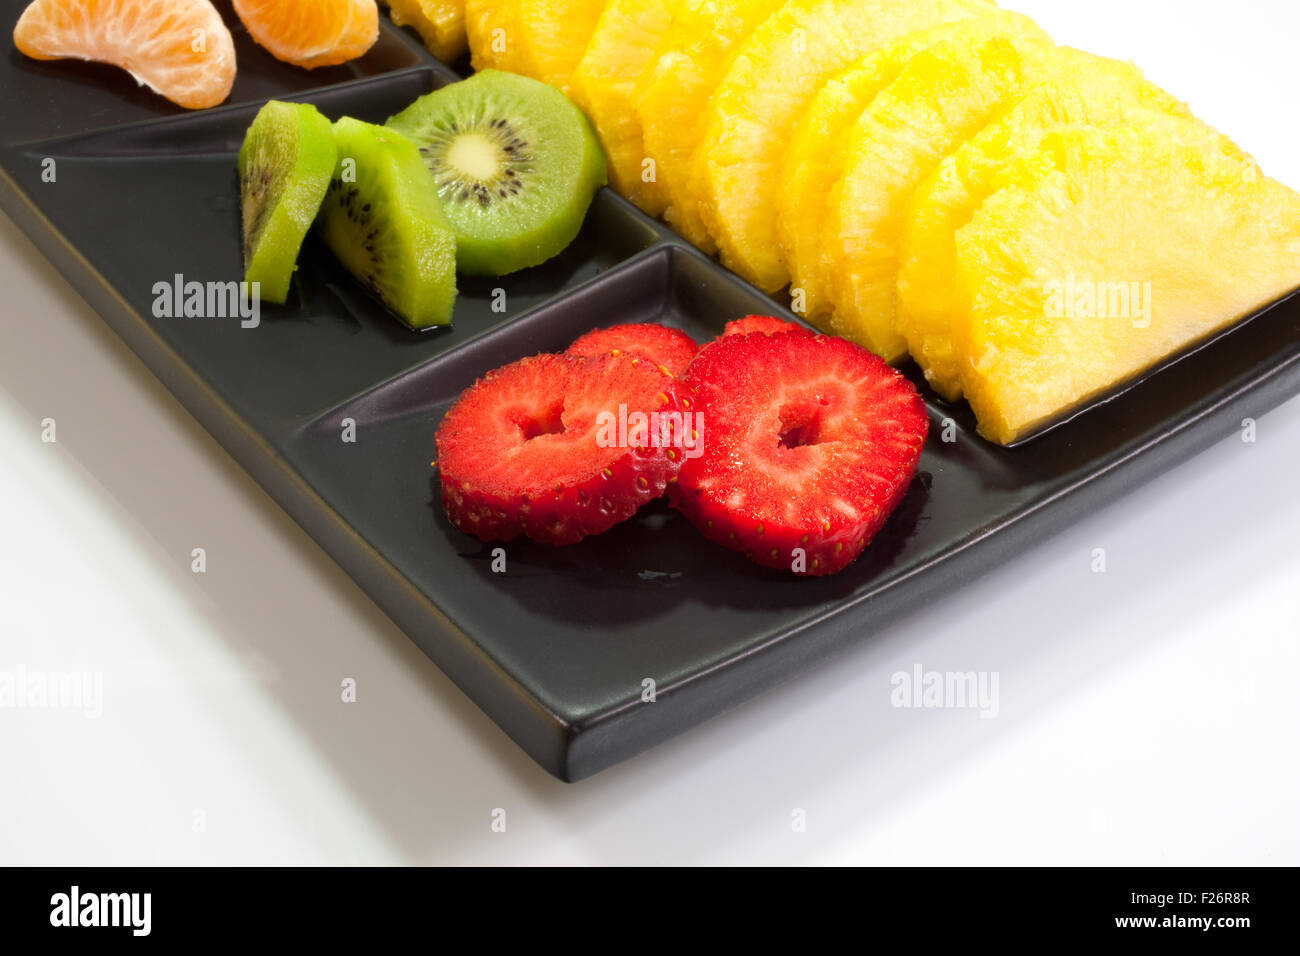 Fruit Slices Stock Photos - 3,104,069 Images